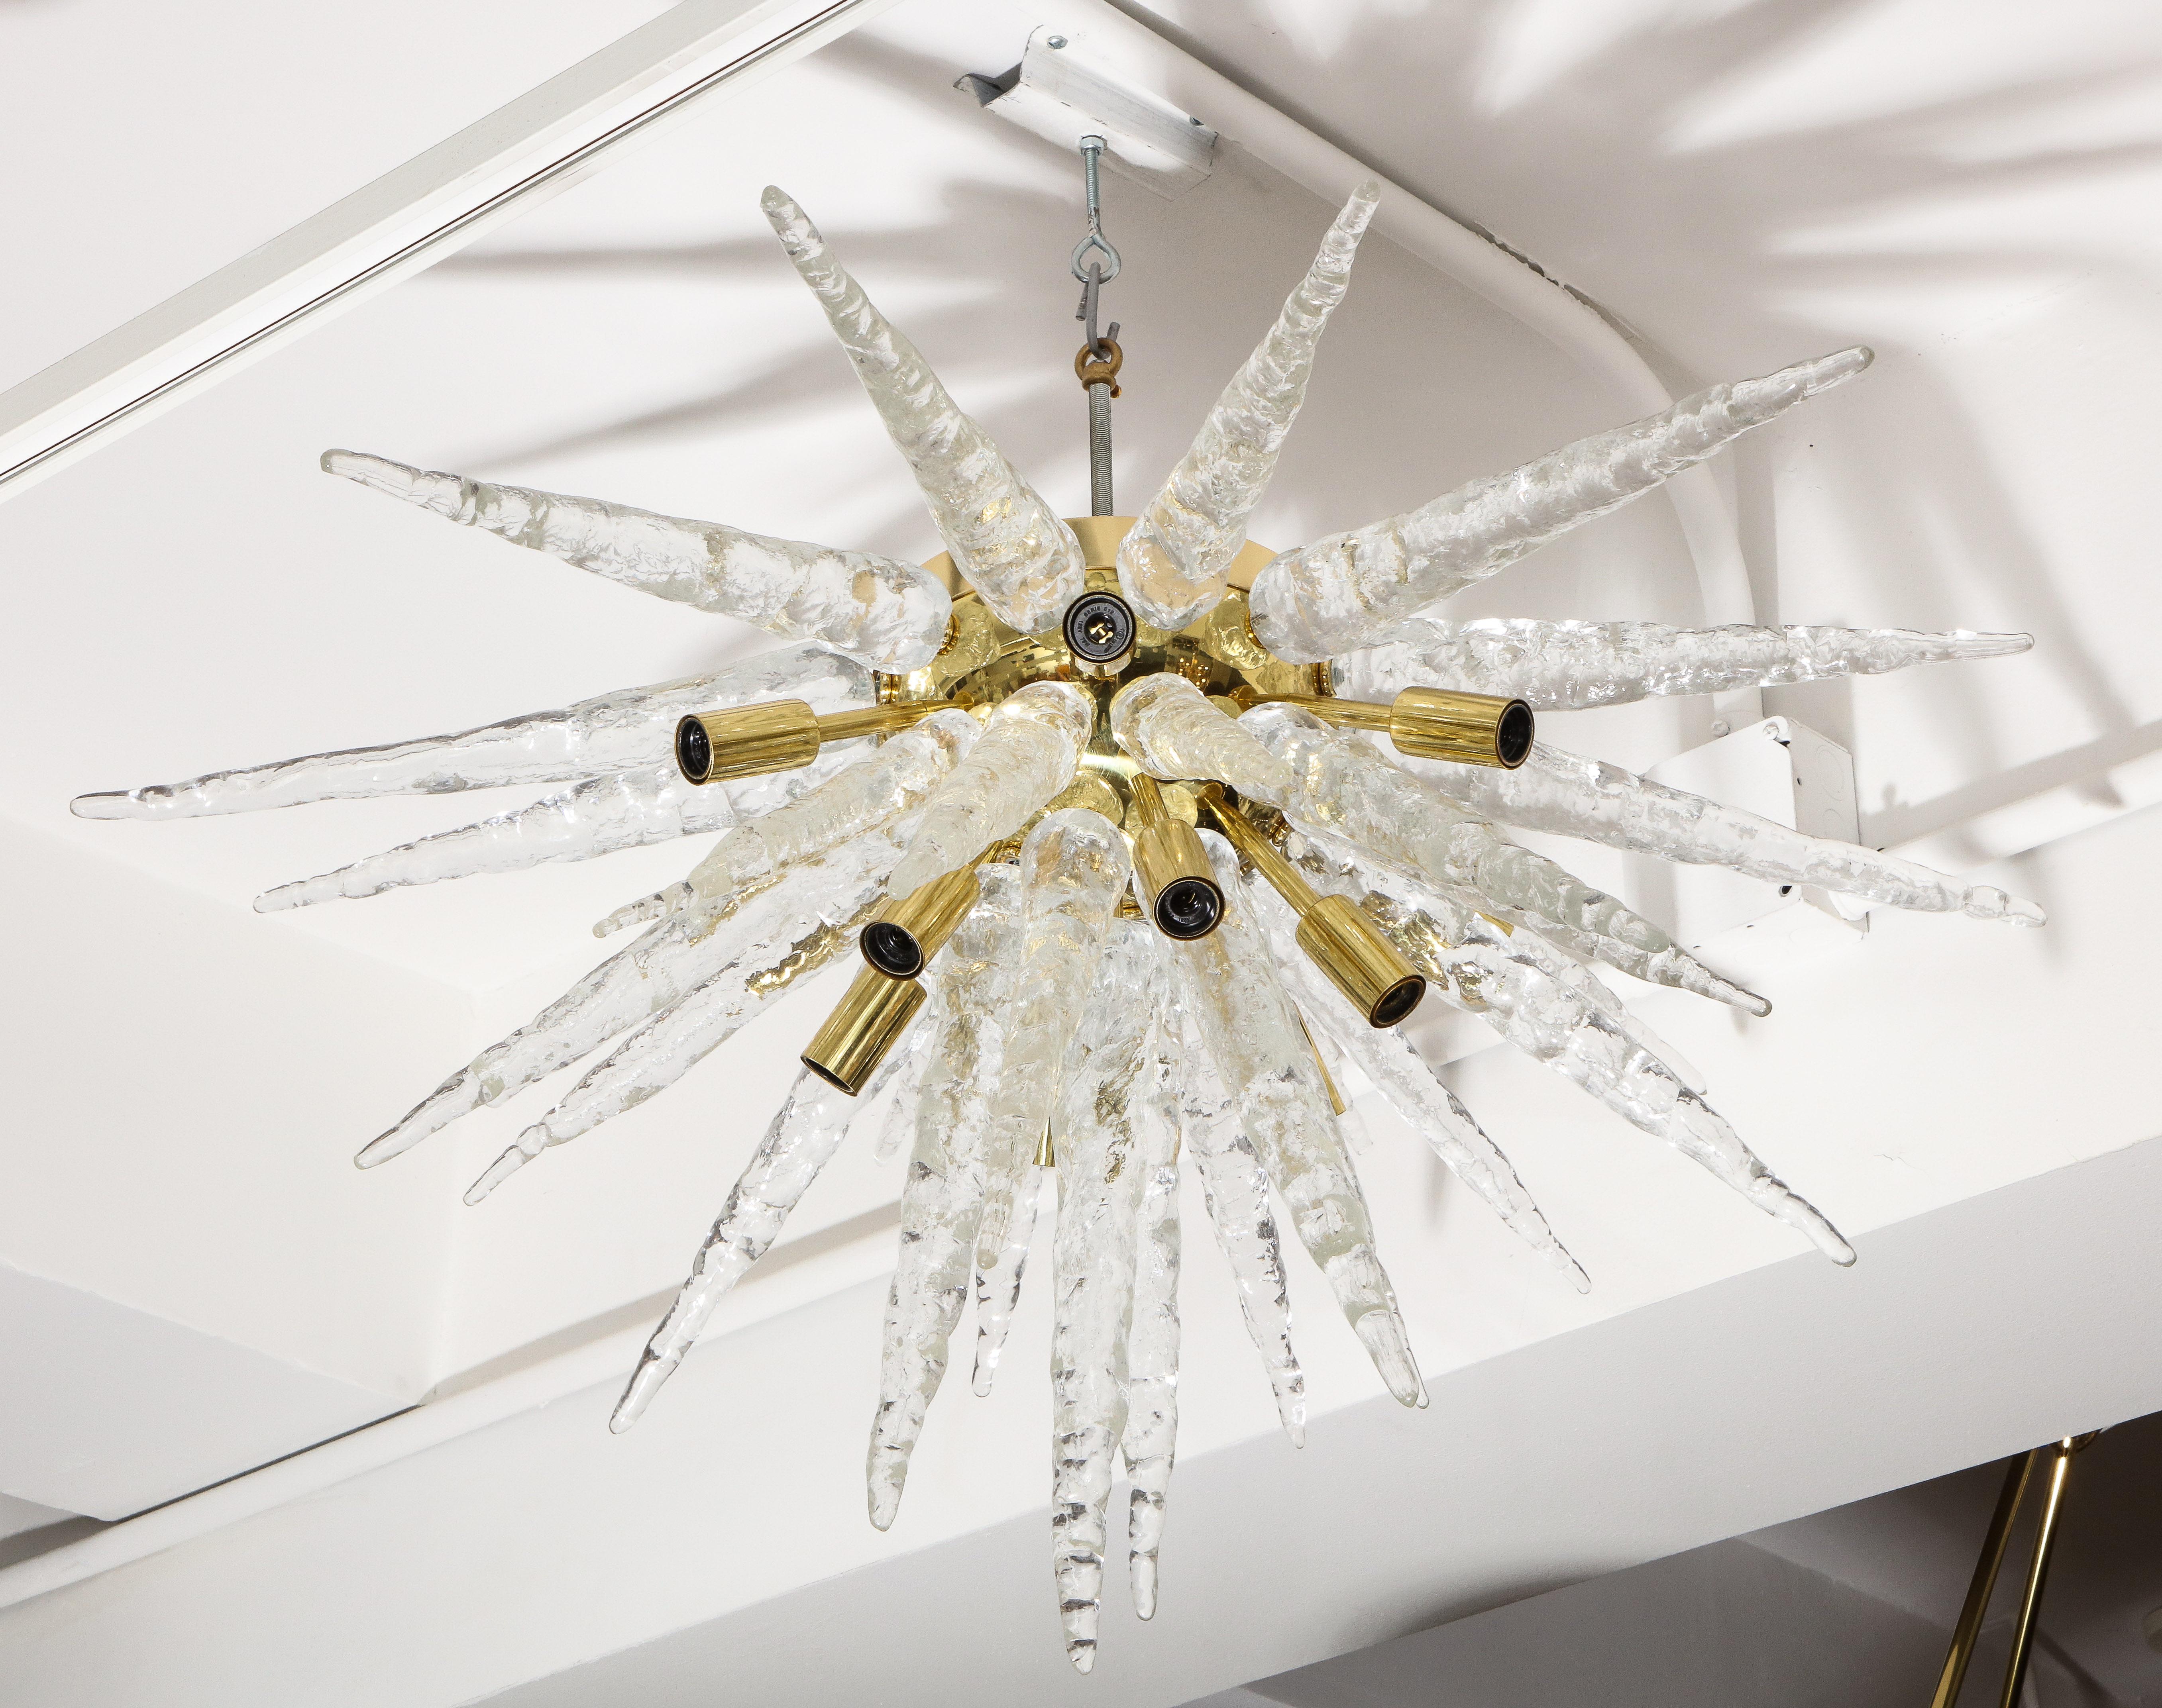 Unusual Murano glass ceiling light
Perfect shape
Possibility of a second one to make a pair.